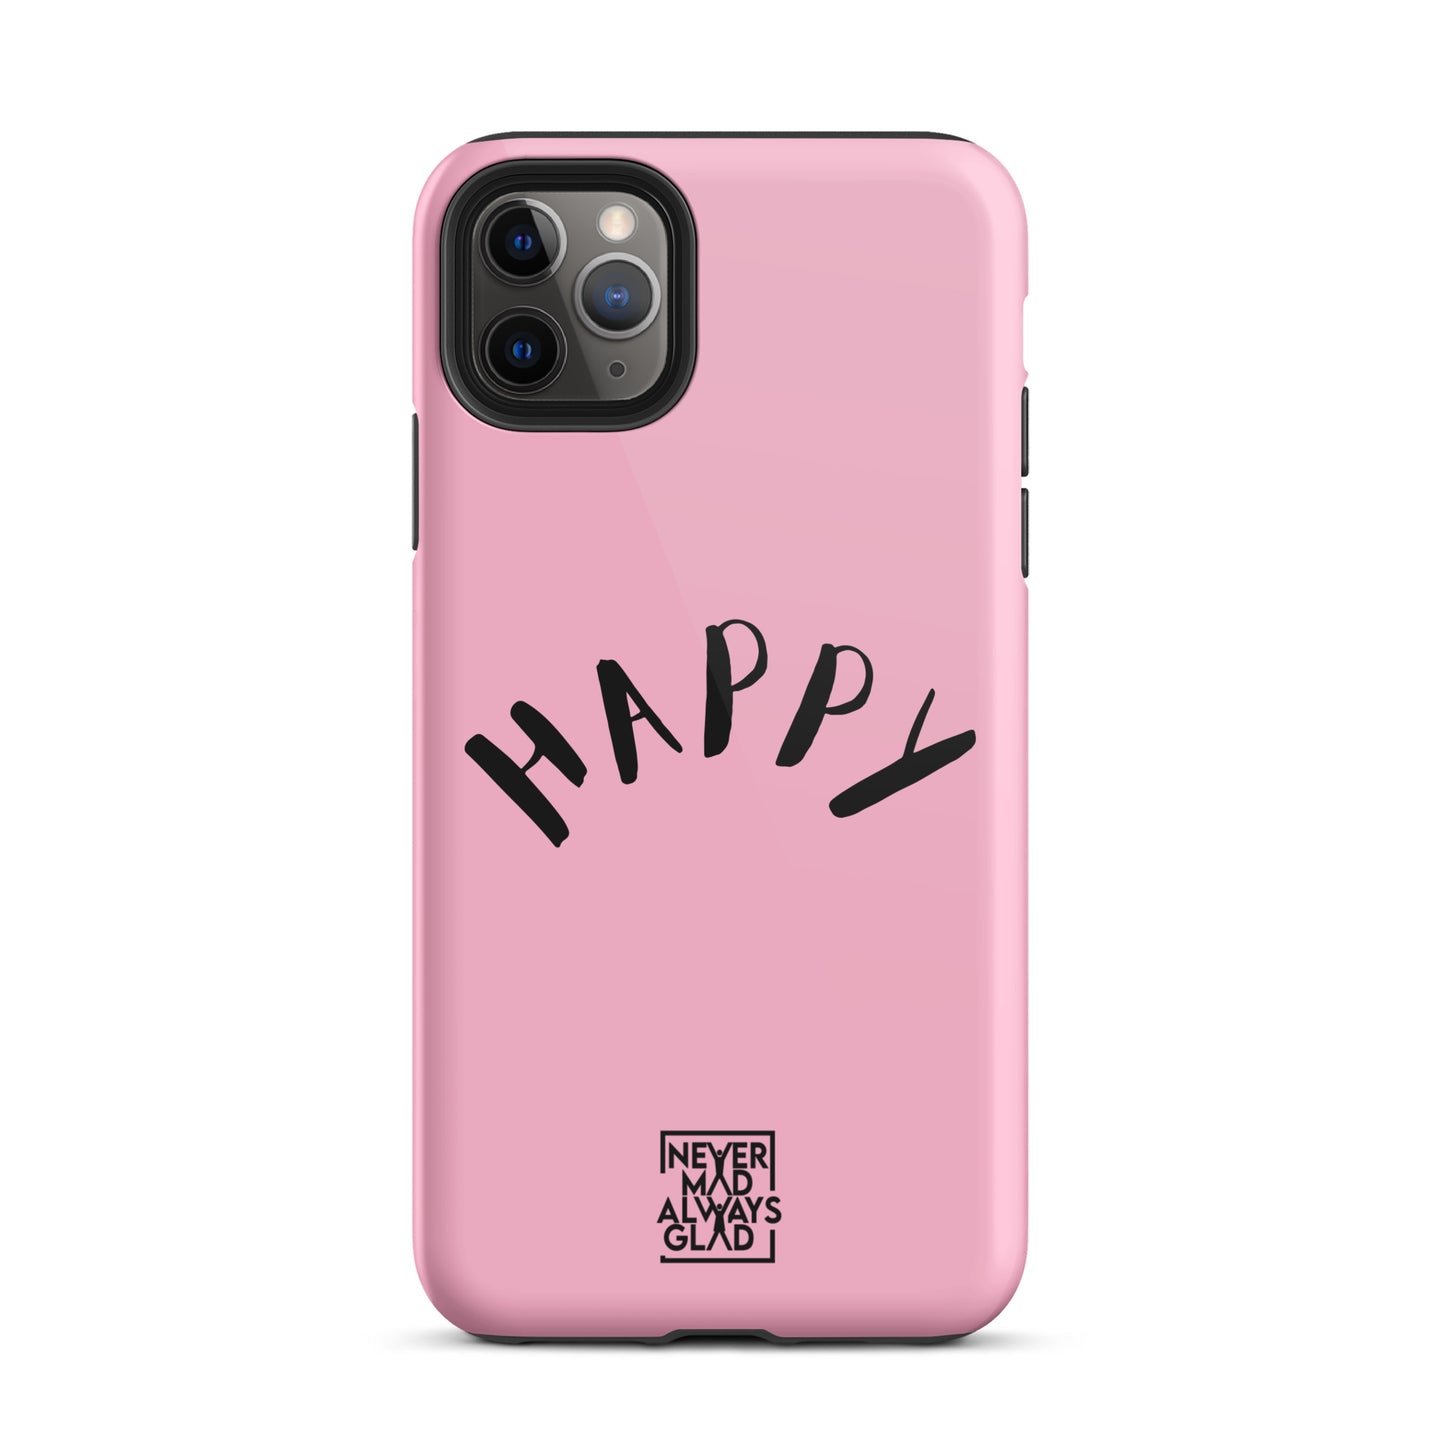 NMAG HAPPY PINK Tough iPhone case